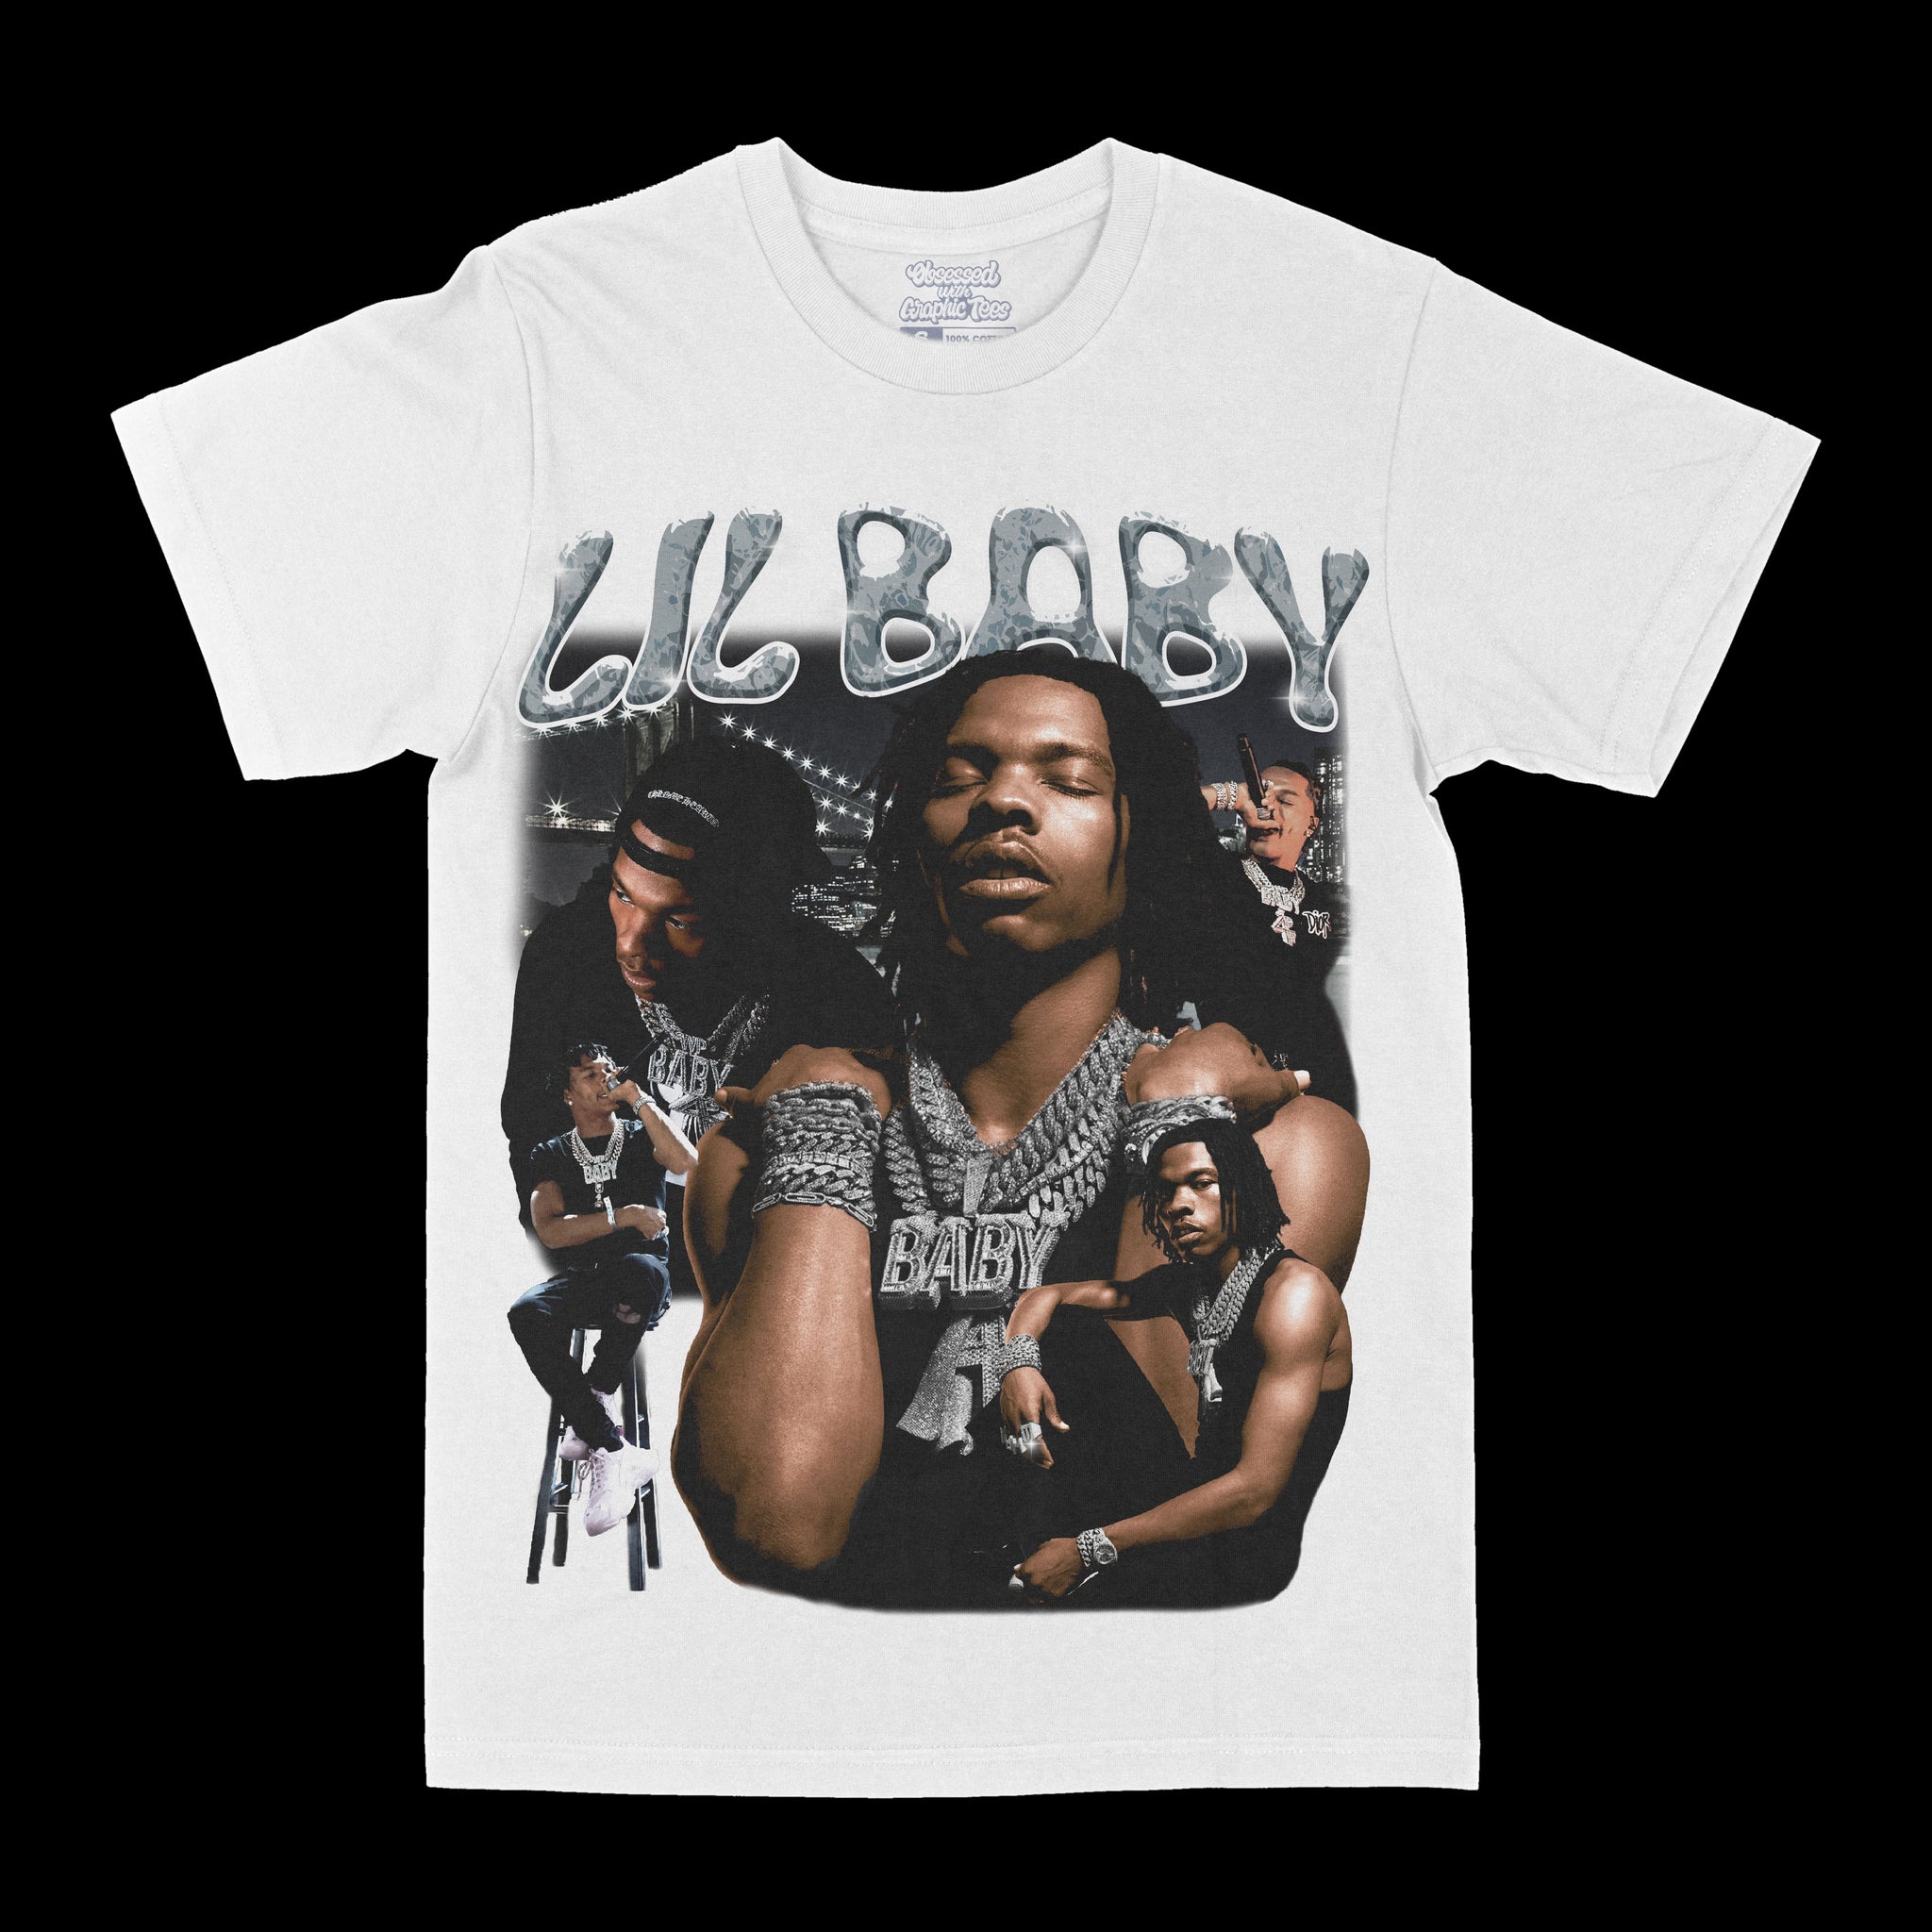 Lil Baby "Chains" Graphic Tee